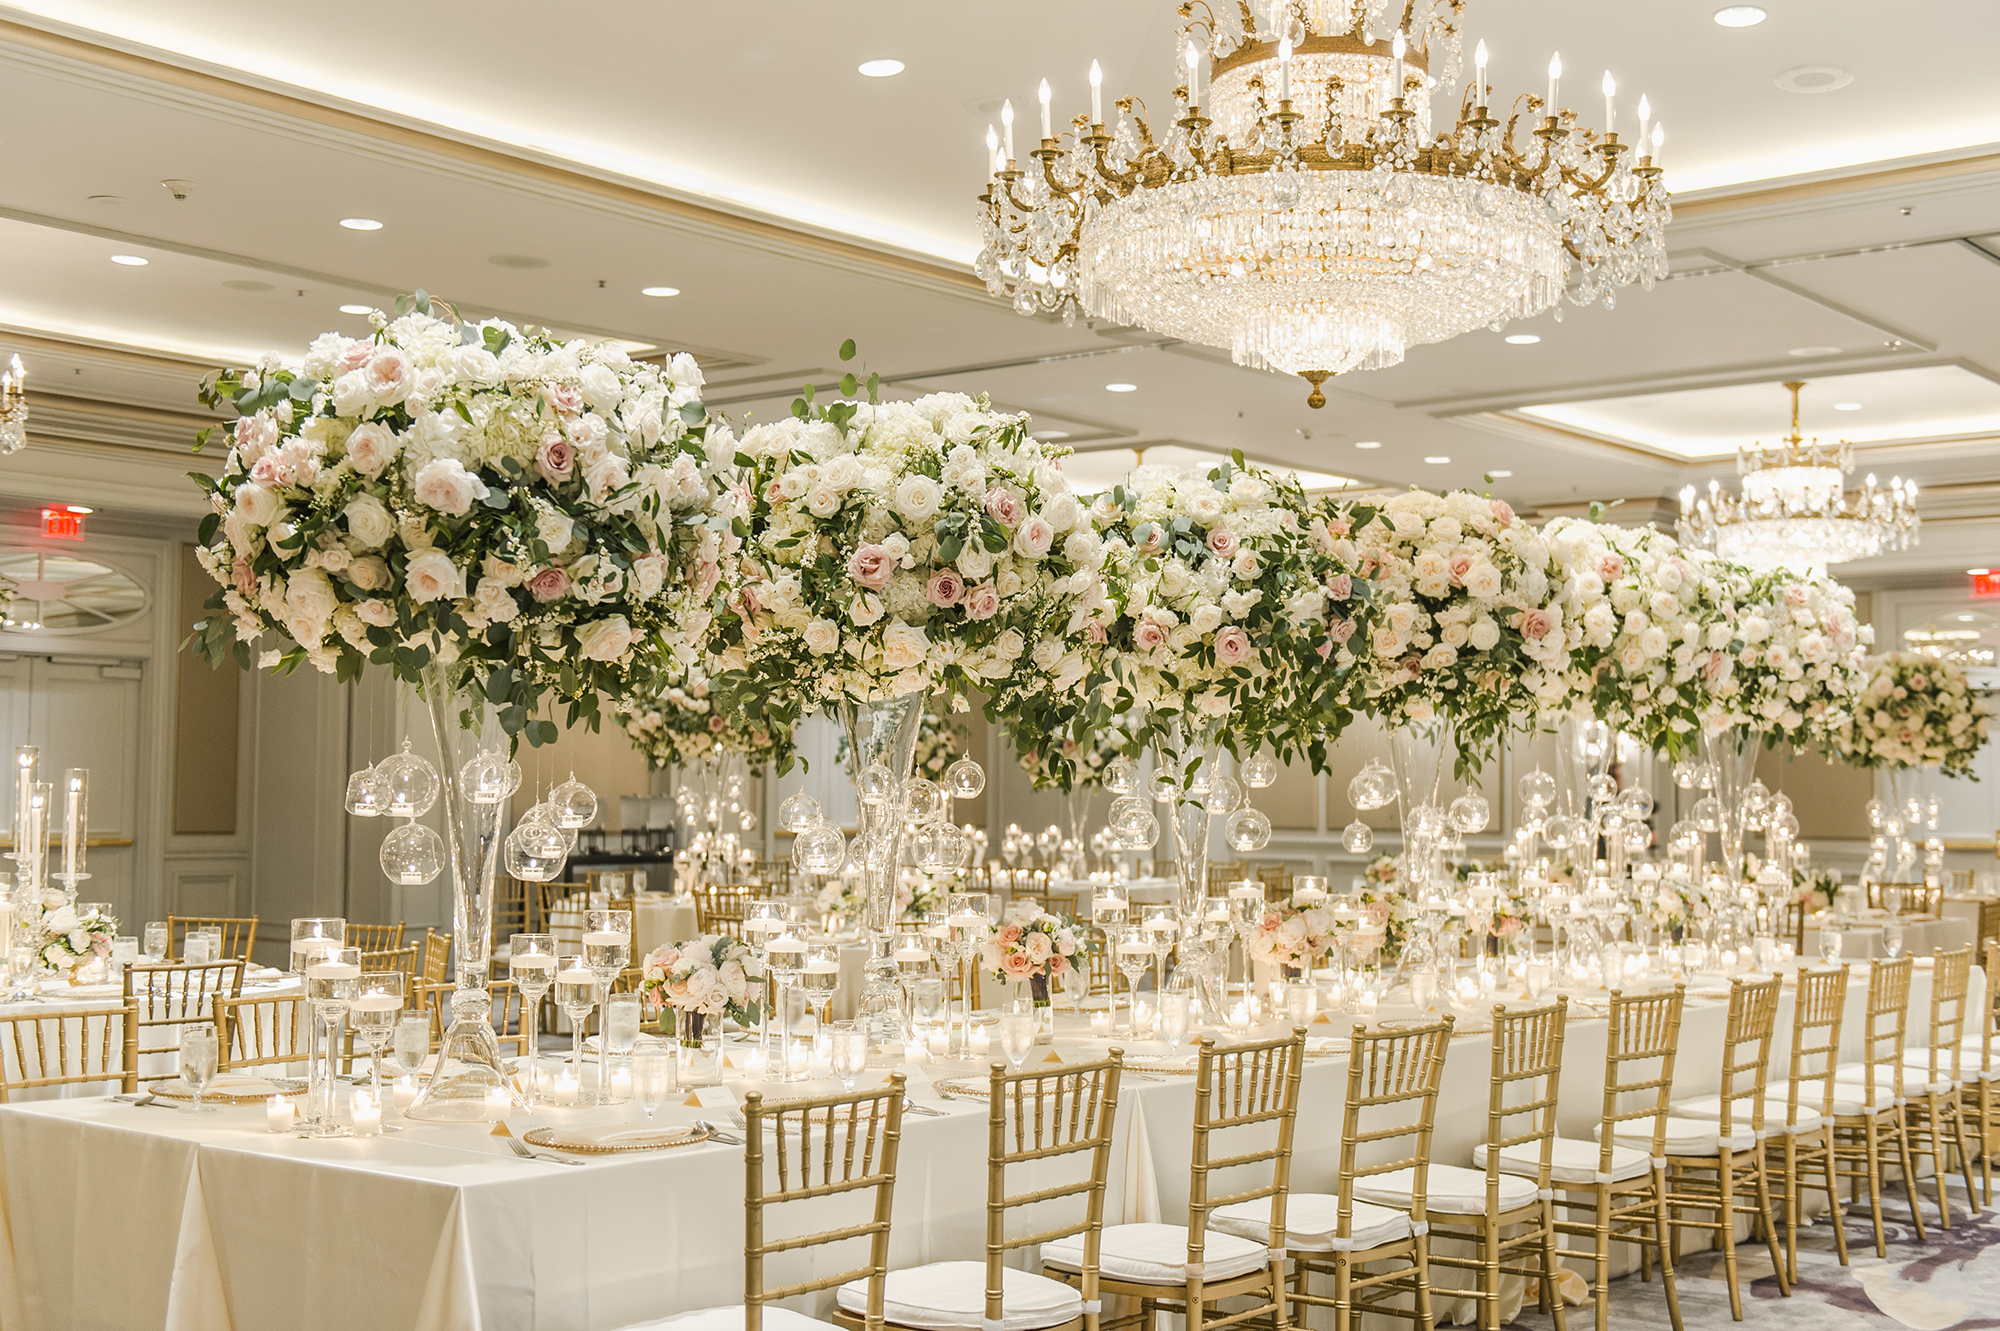 Reception tables and florals